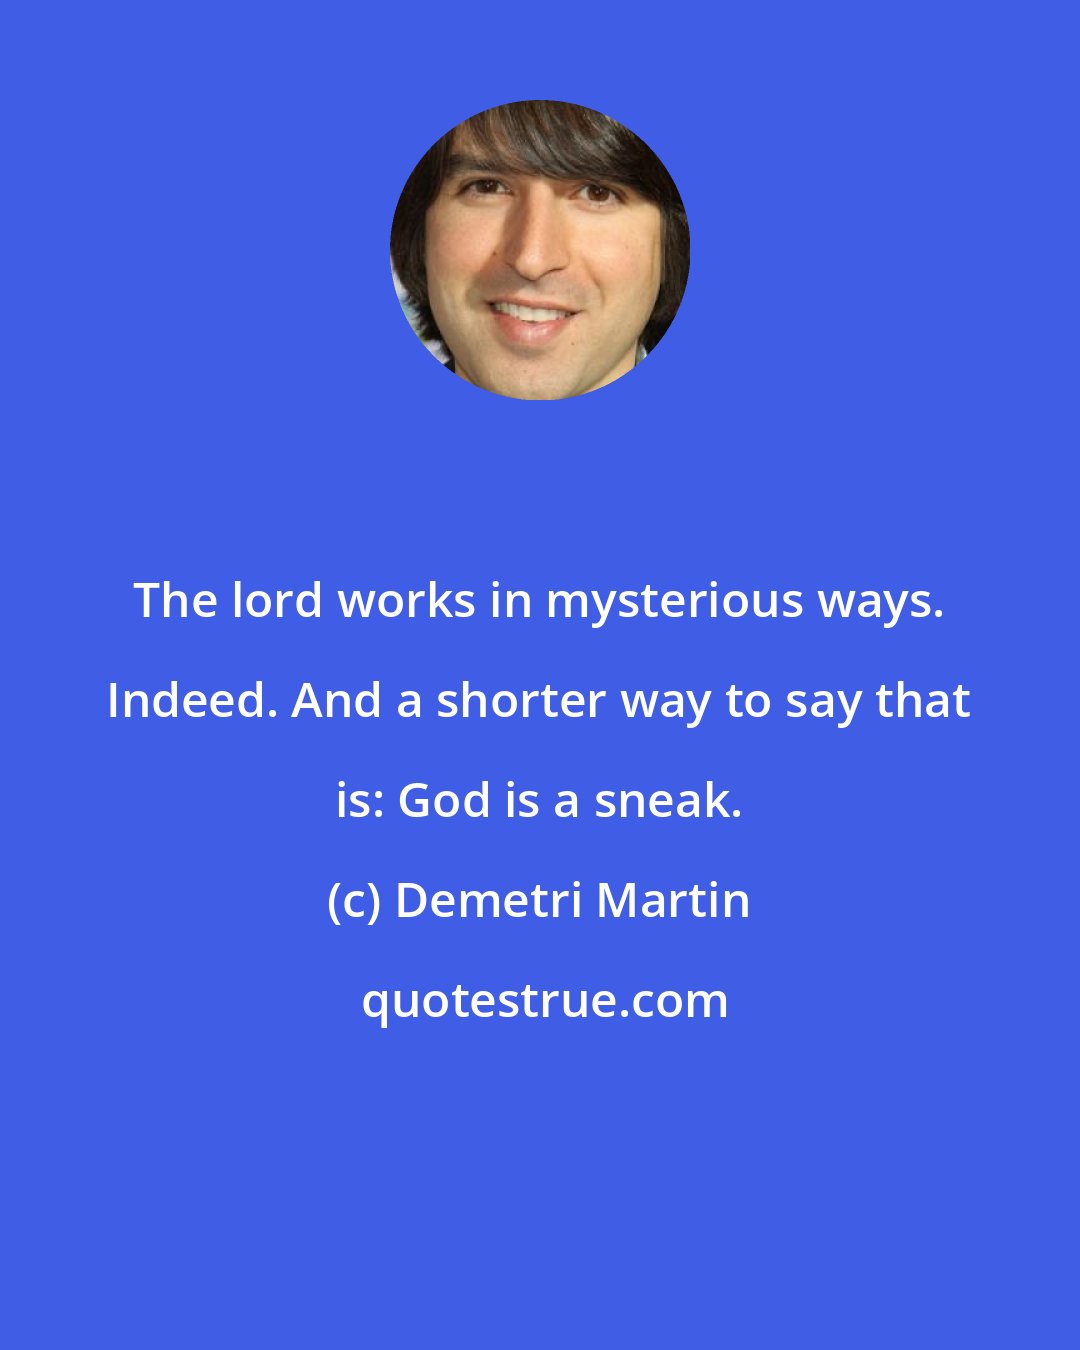 Demetri Martin: The lord works in mysterious ways. Indeed. And a shorter way to say that is: God is a sneak.